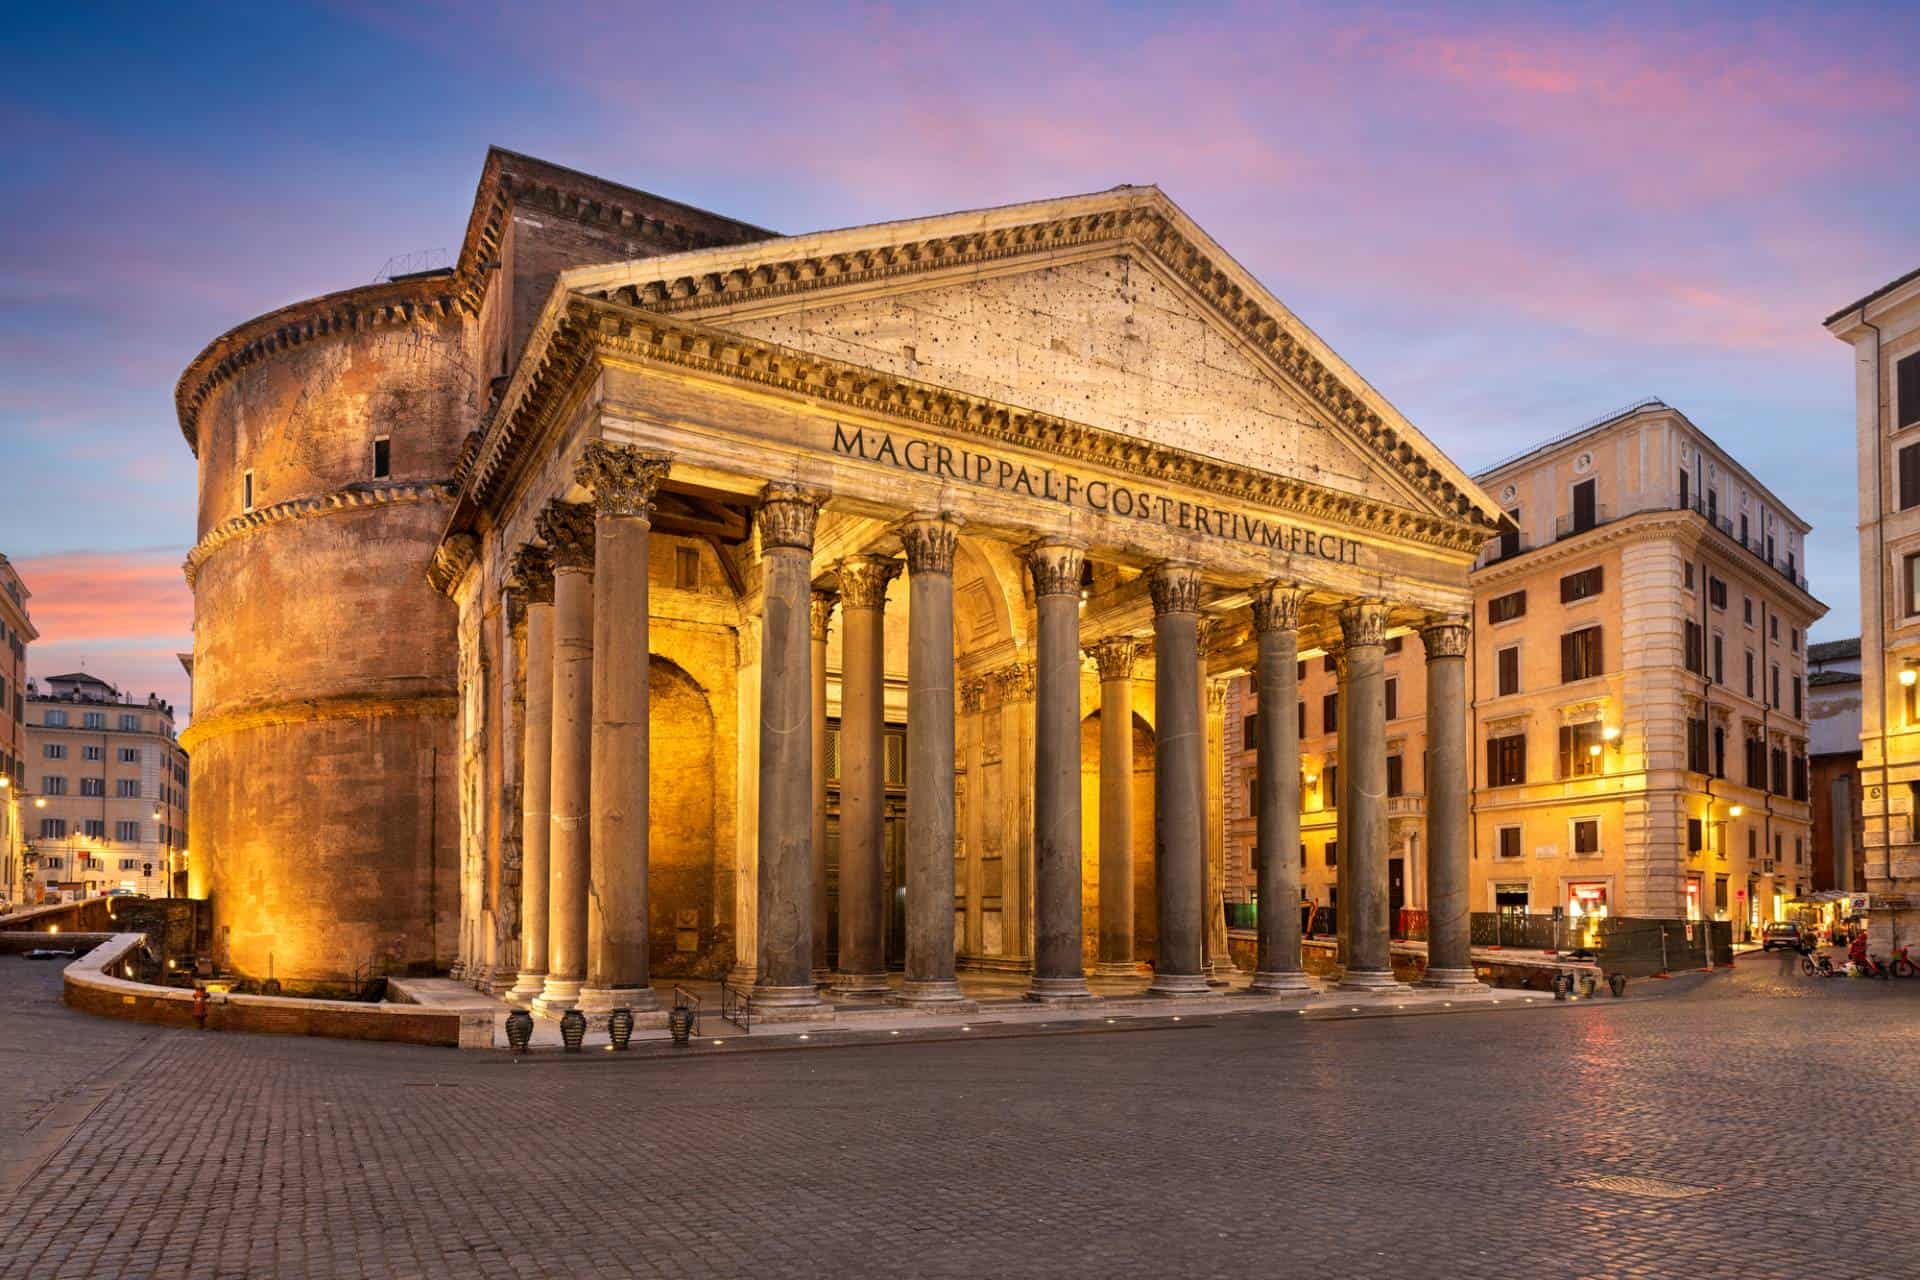 Corinthian columns of The Pantheon, an ancient Roman Temple in Rome, Italy.